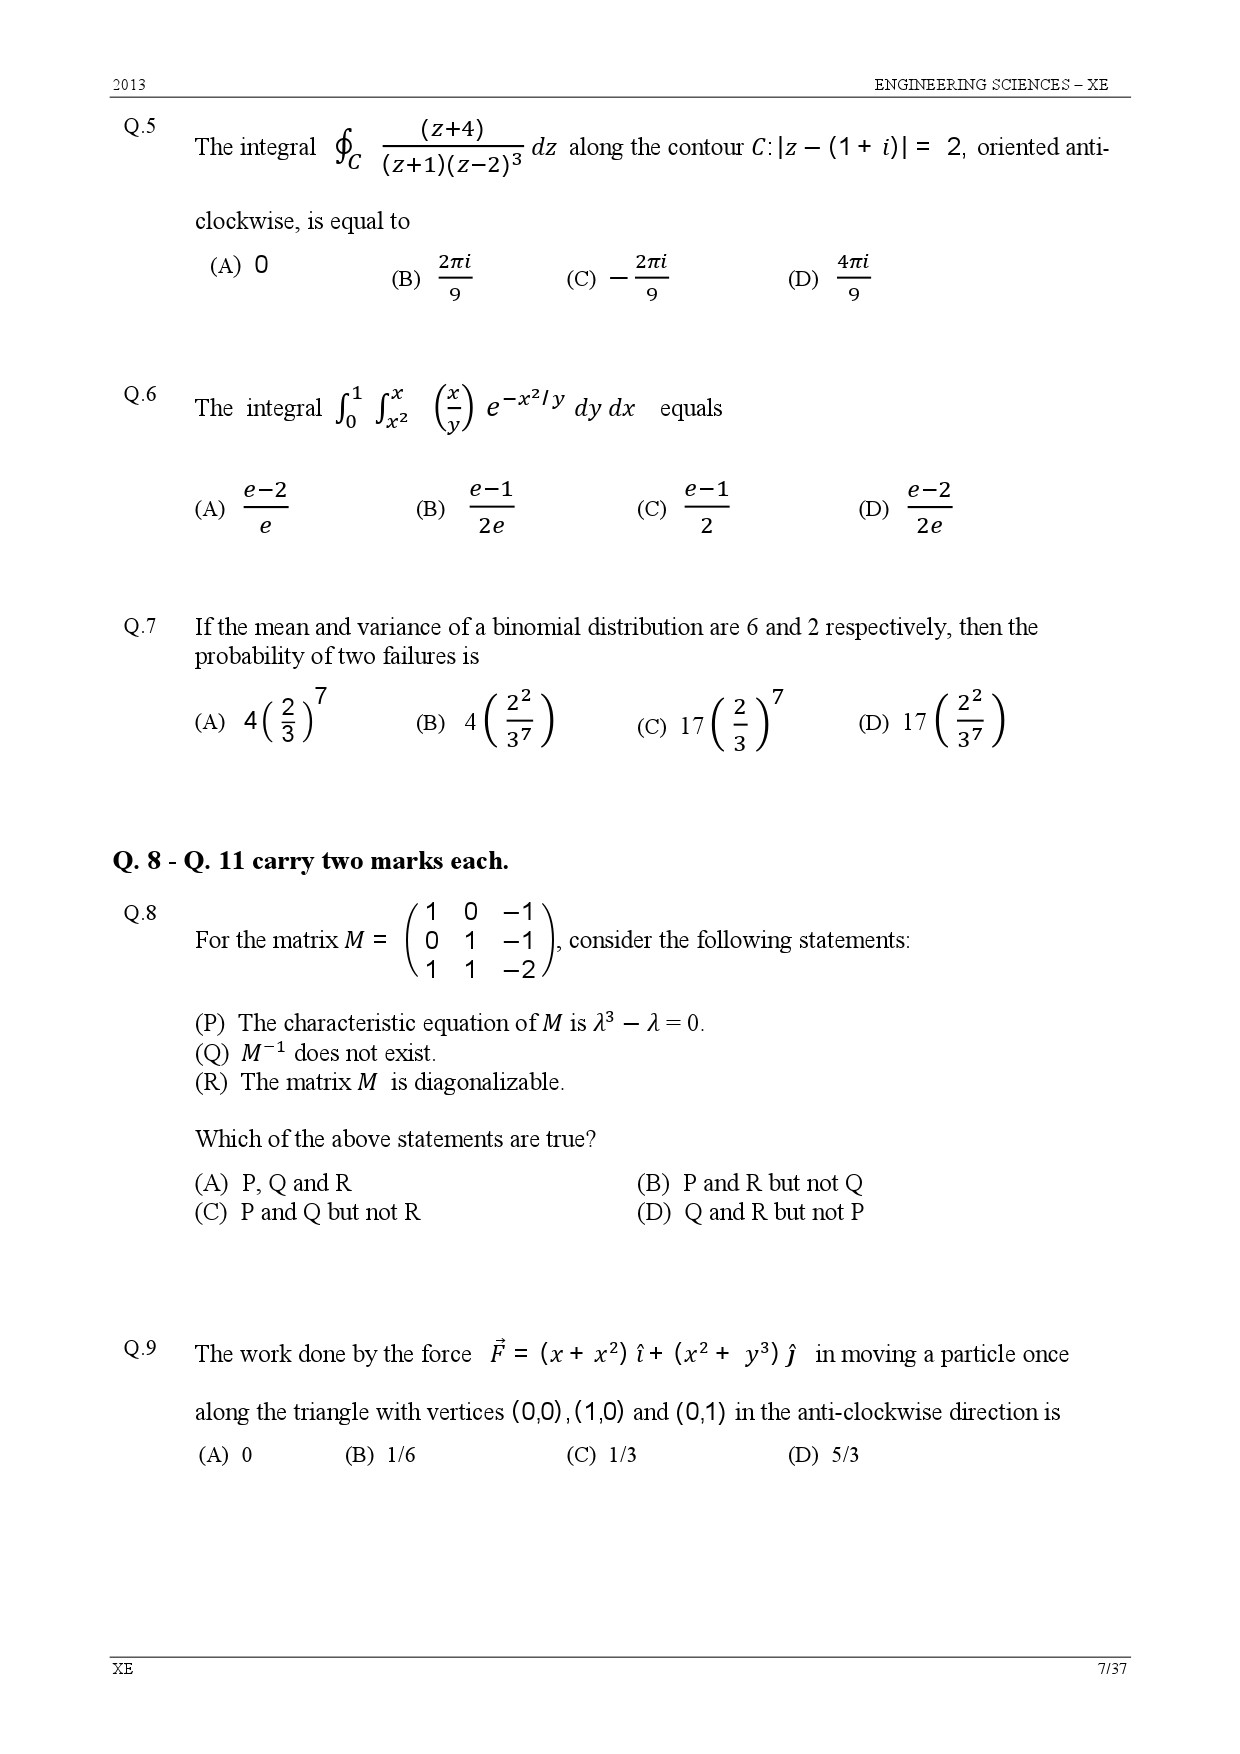 GATE Exam Question Paper 2013 Engineering Sciences 7